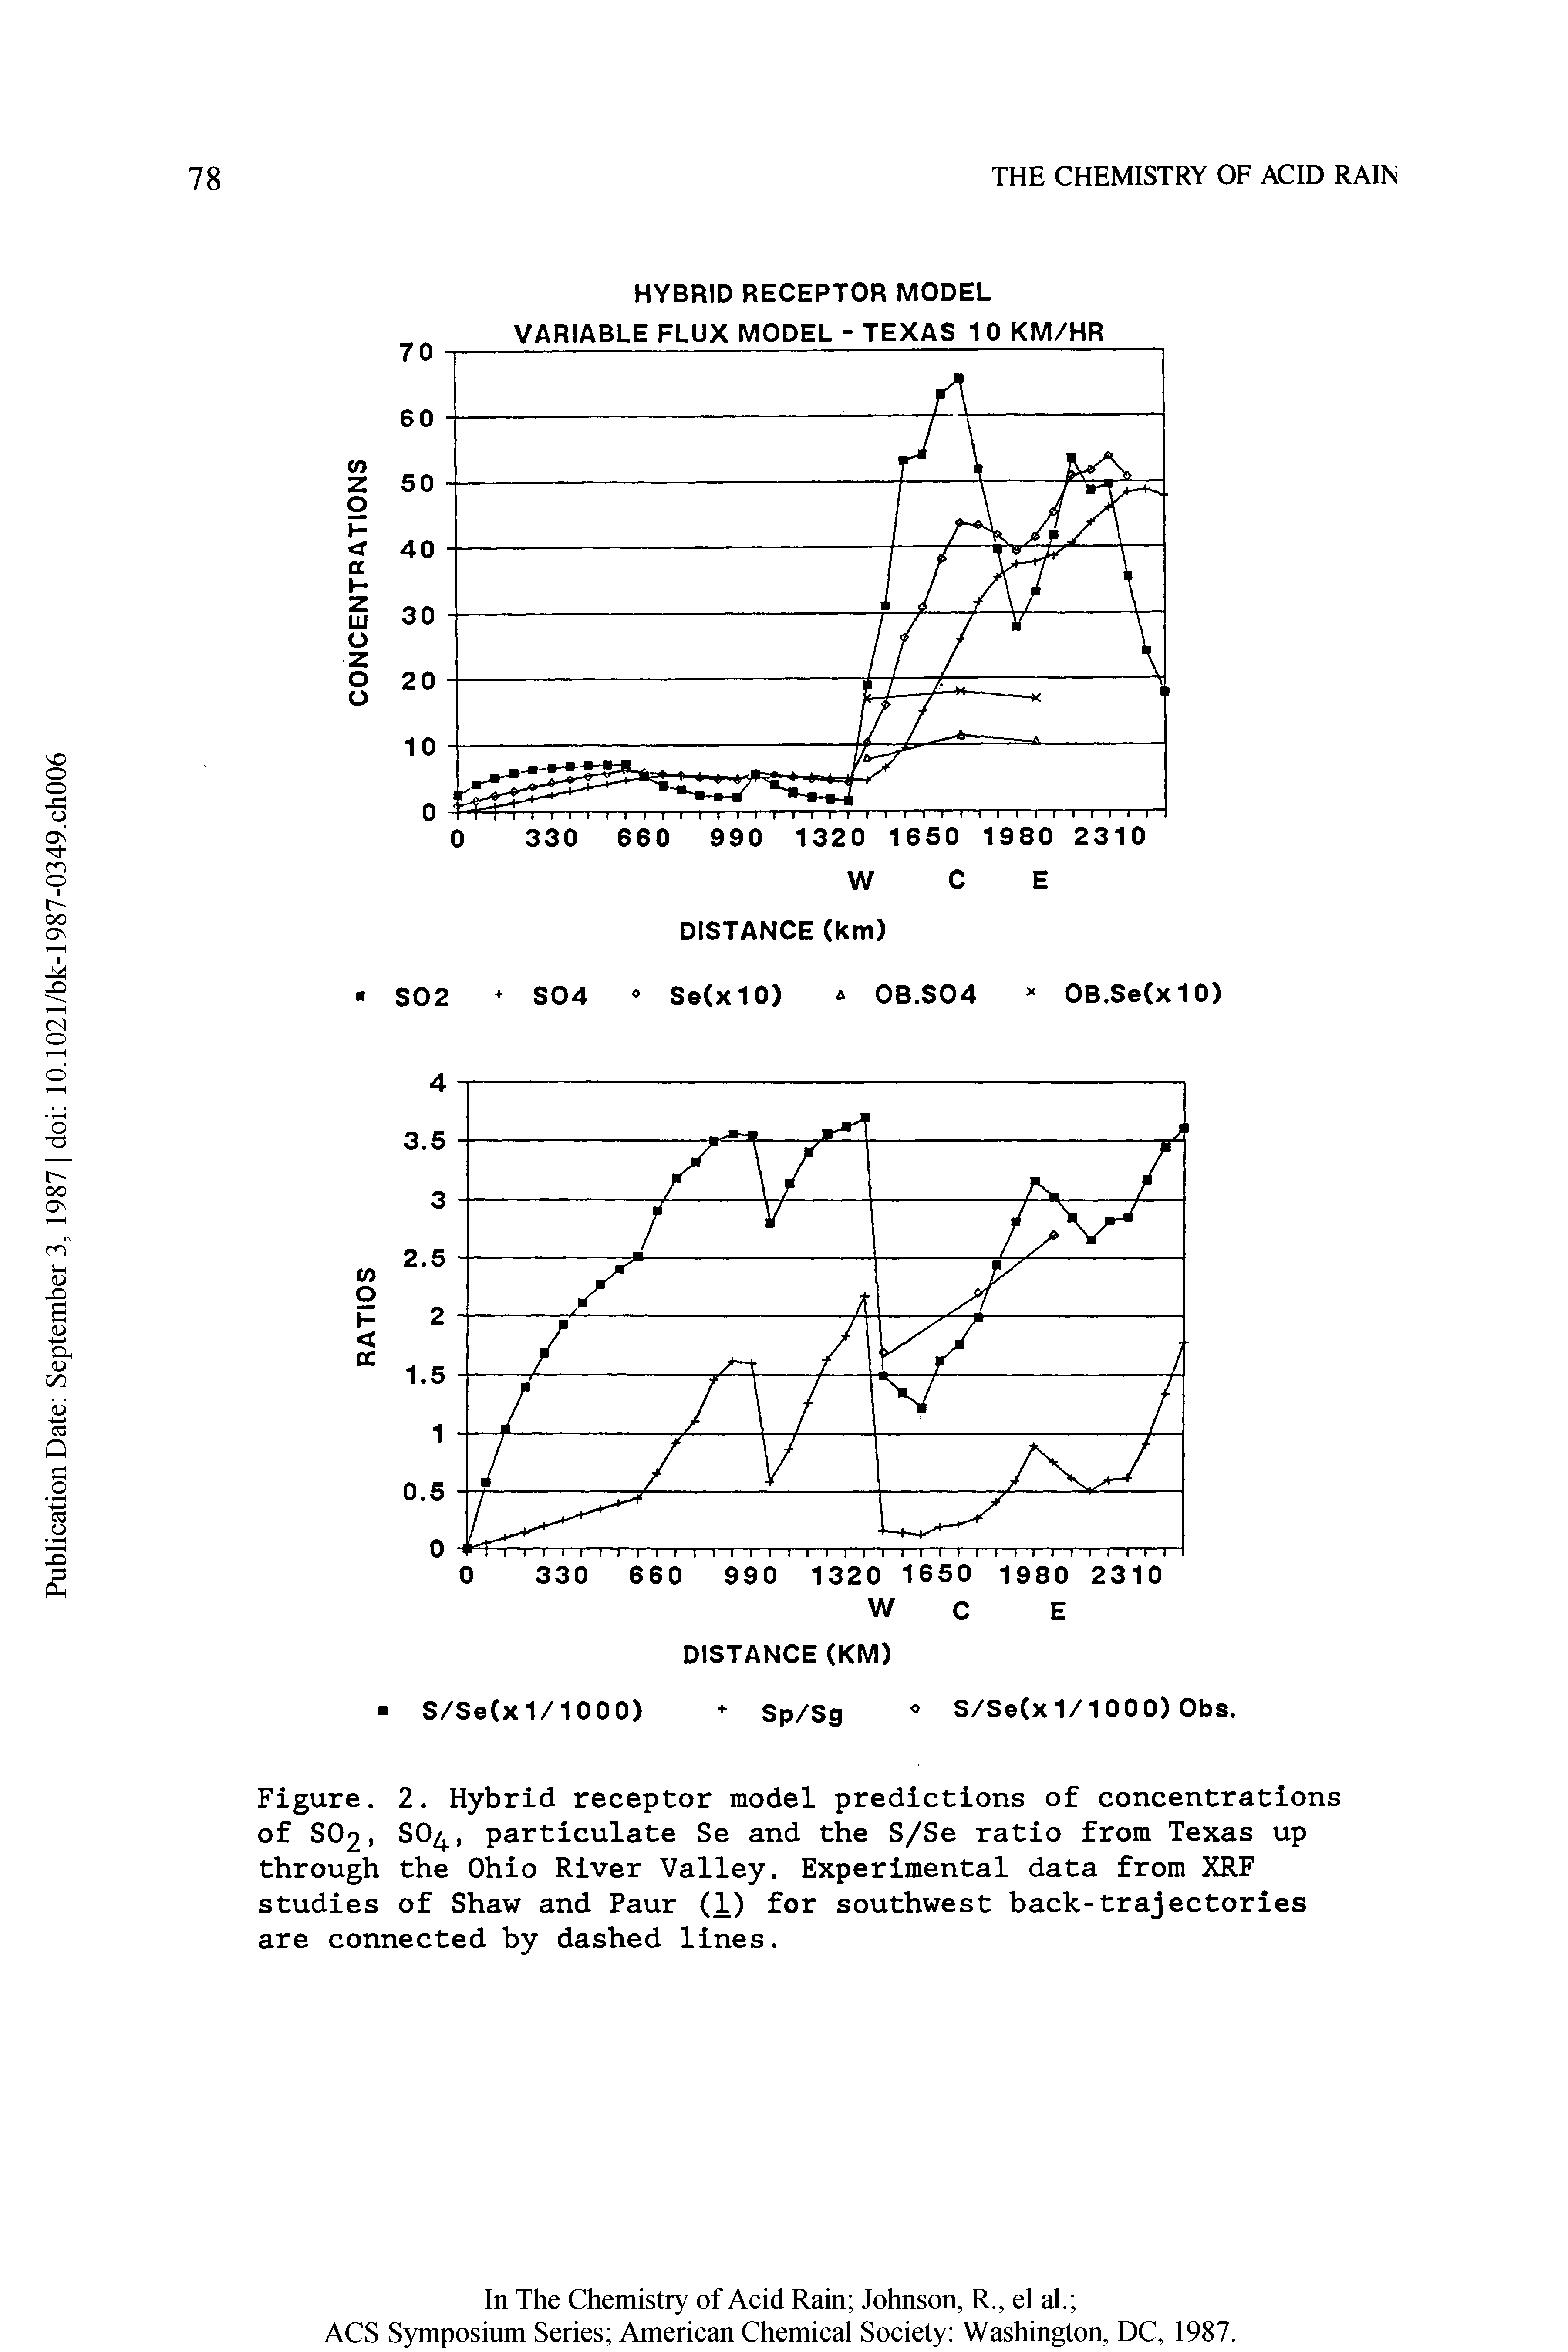 Figure. 2. Hybrid receptor model predictions of concentrations of SO2, SO4, particulate Se and the S/Se ratio from Texas up through the Ohio River Valley. Experimental data from XRF studies of Shaw and Paur (1) for southwest back-trajectories are connected by dashed lines.